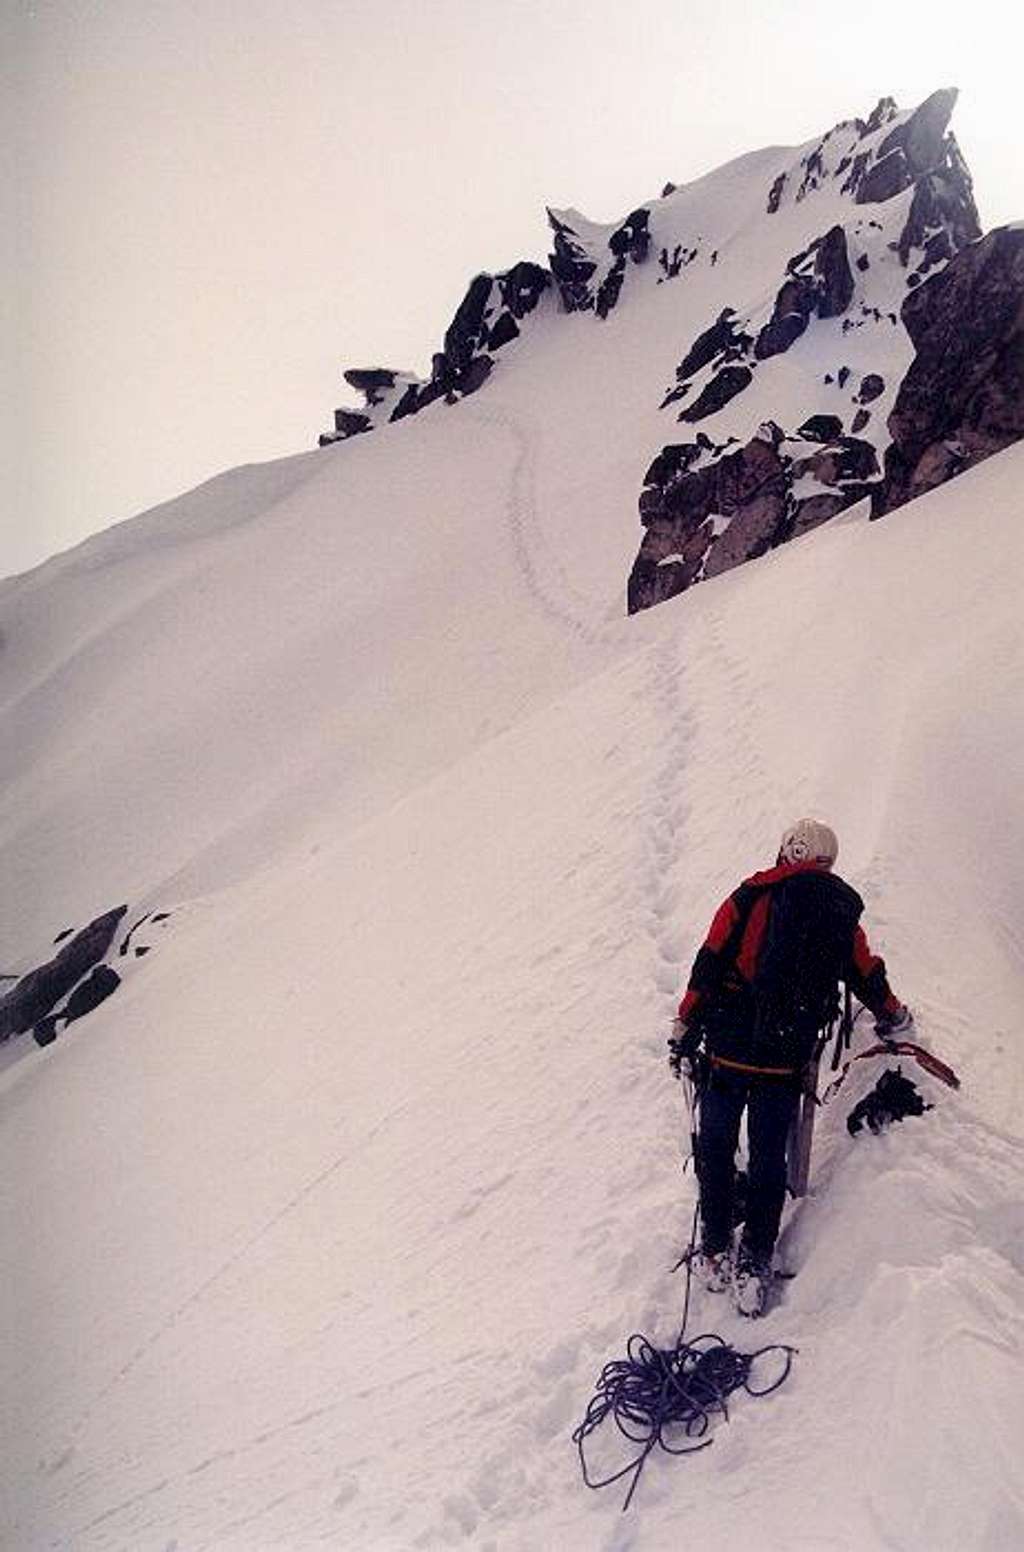 The final steep traverse from...